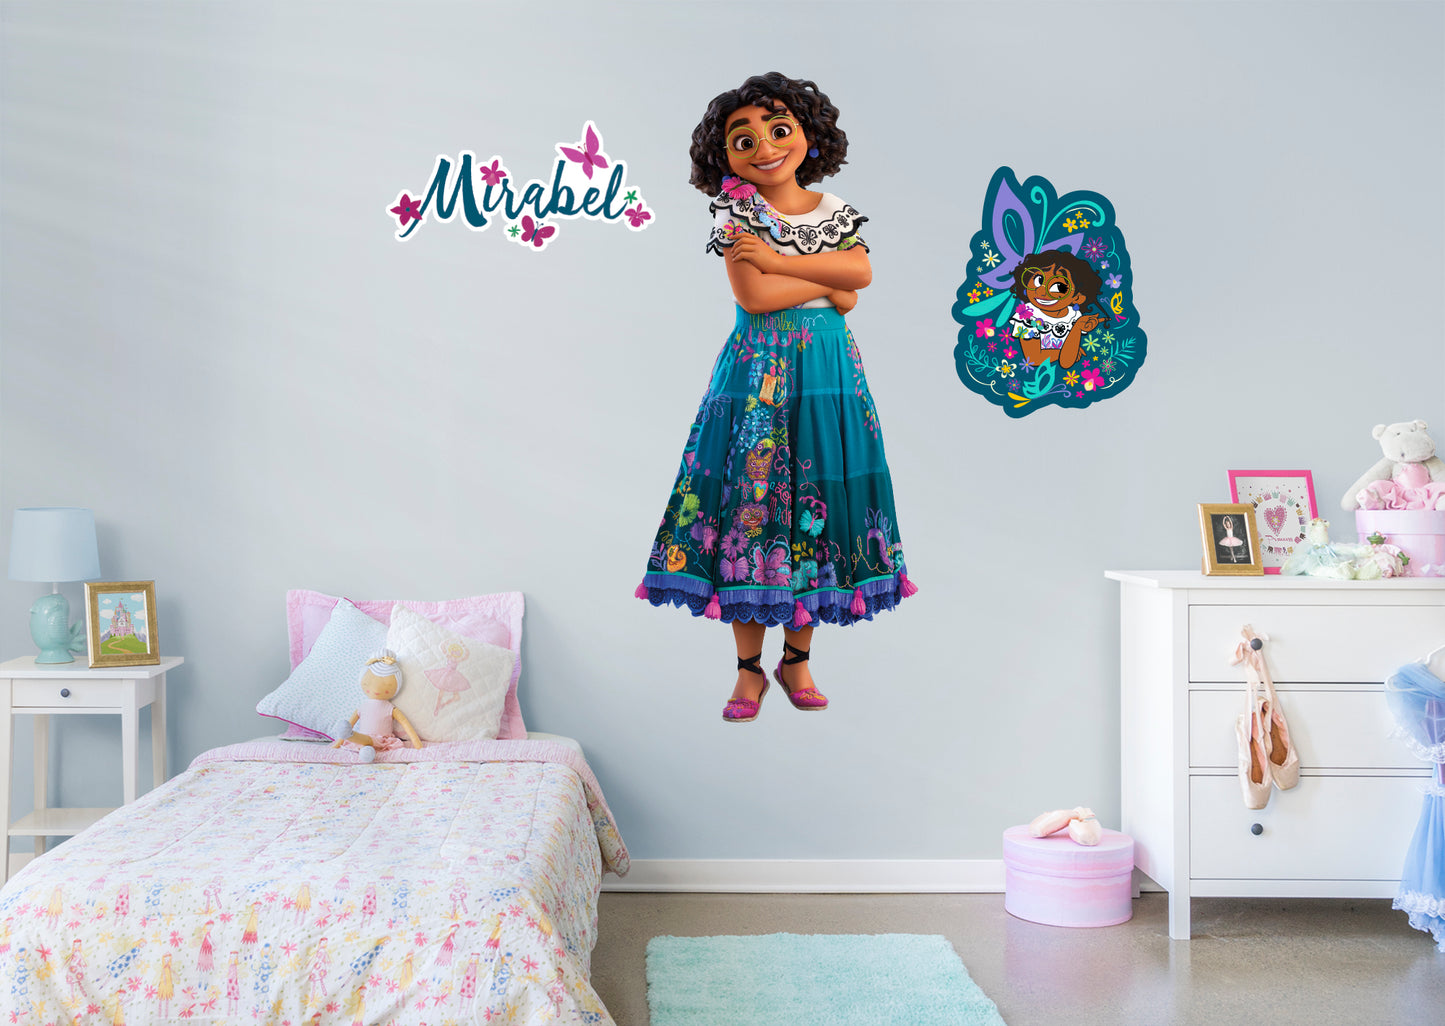 Encanto: Mirabel RealBig        - Officially Licensed Disney Removable     Adhesive Decal